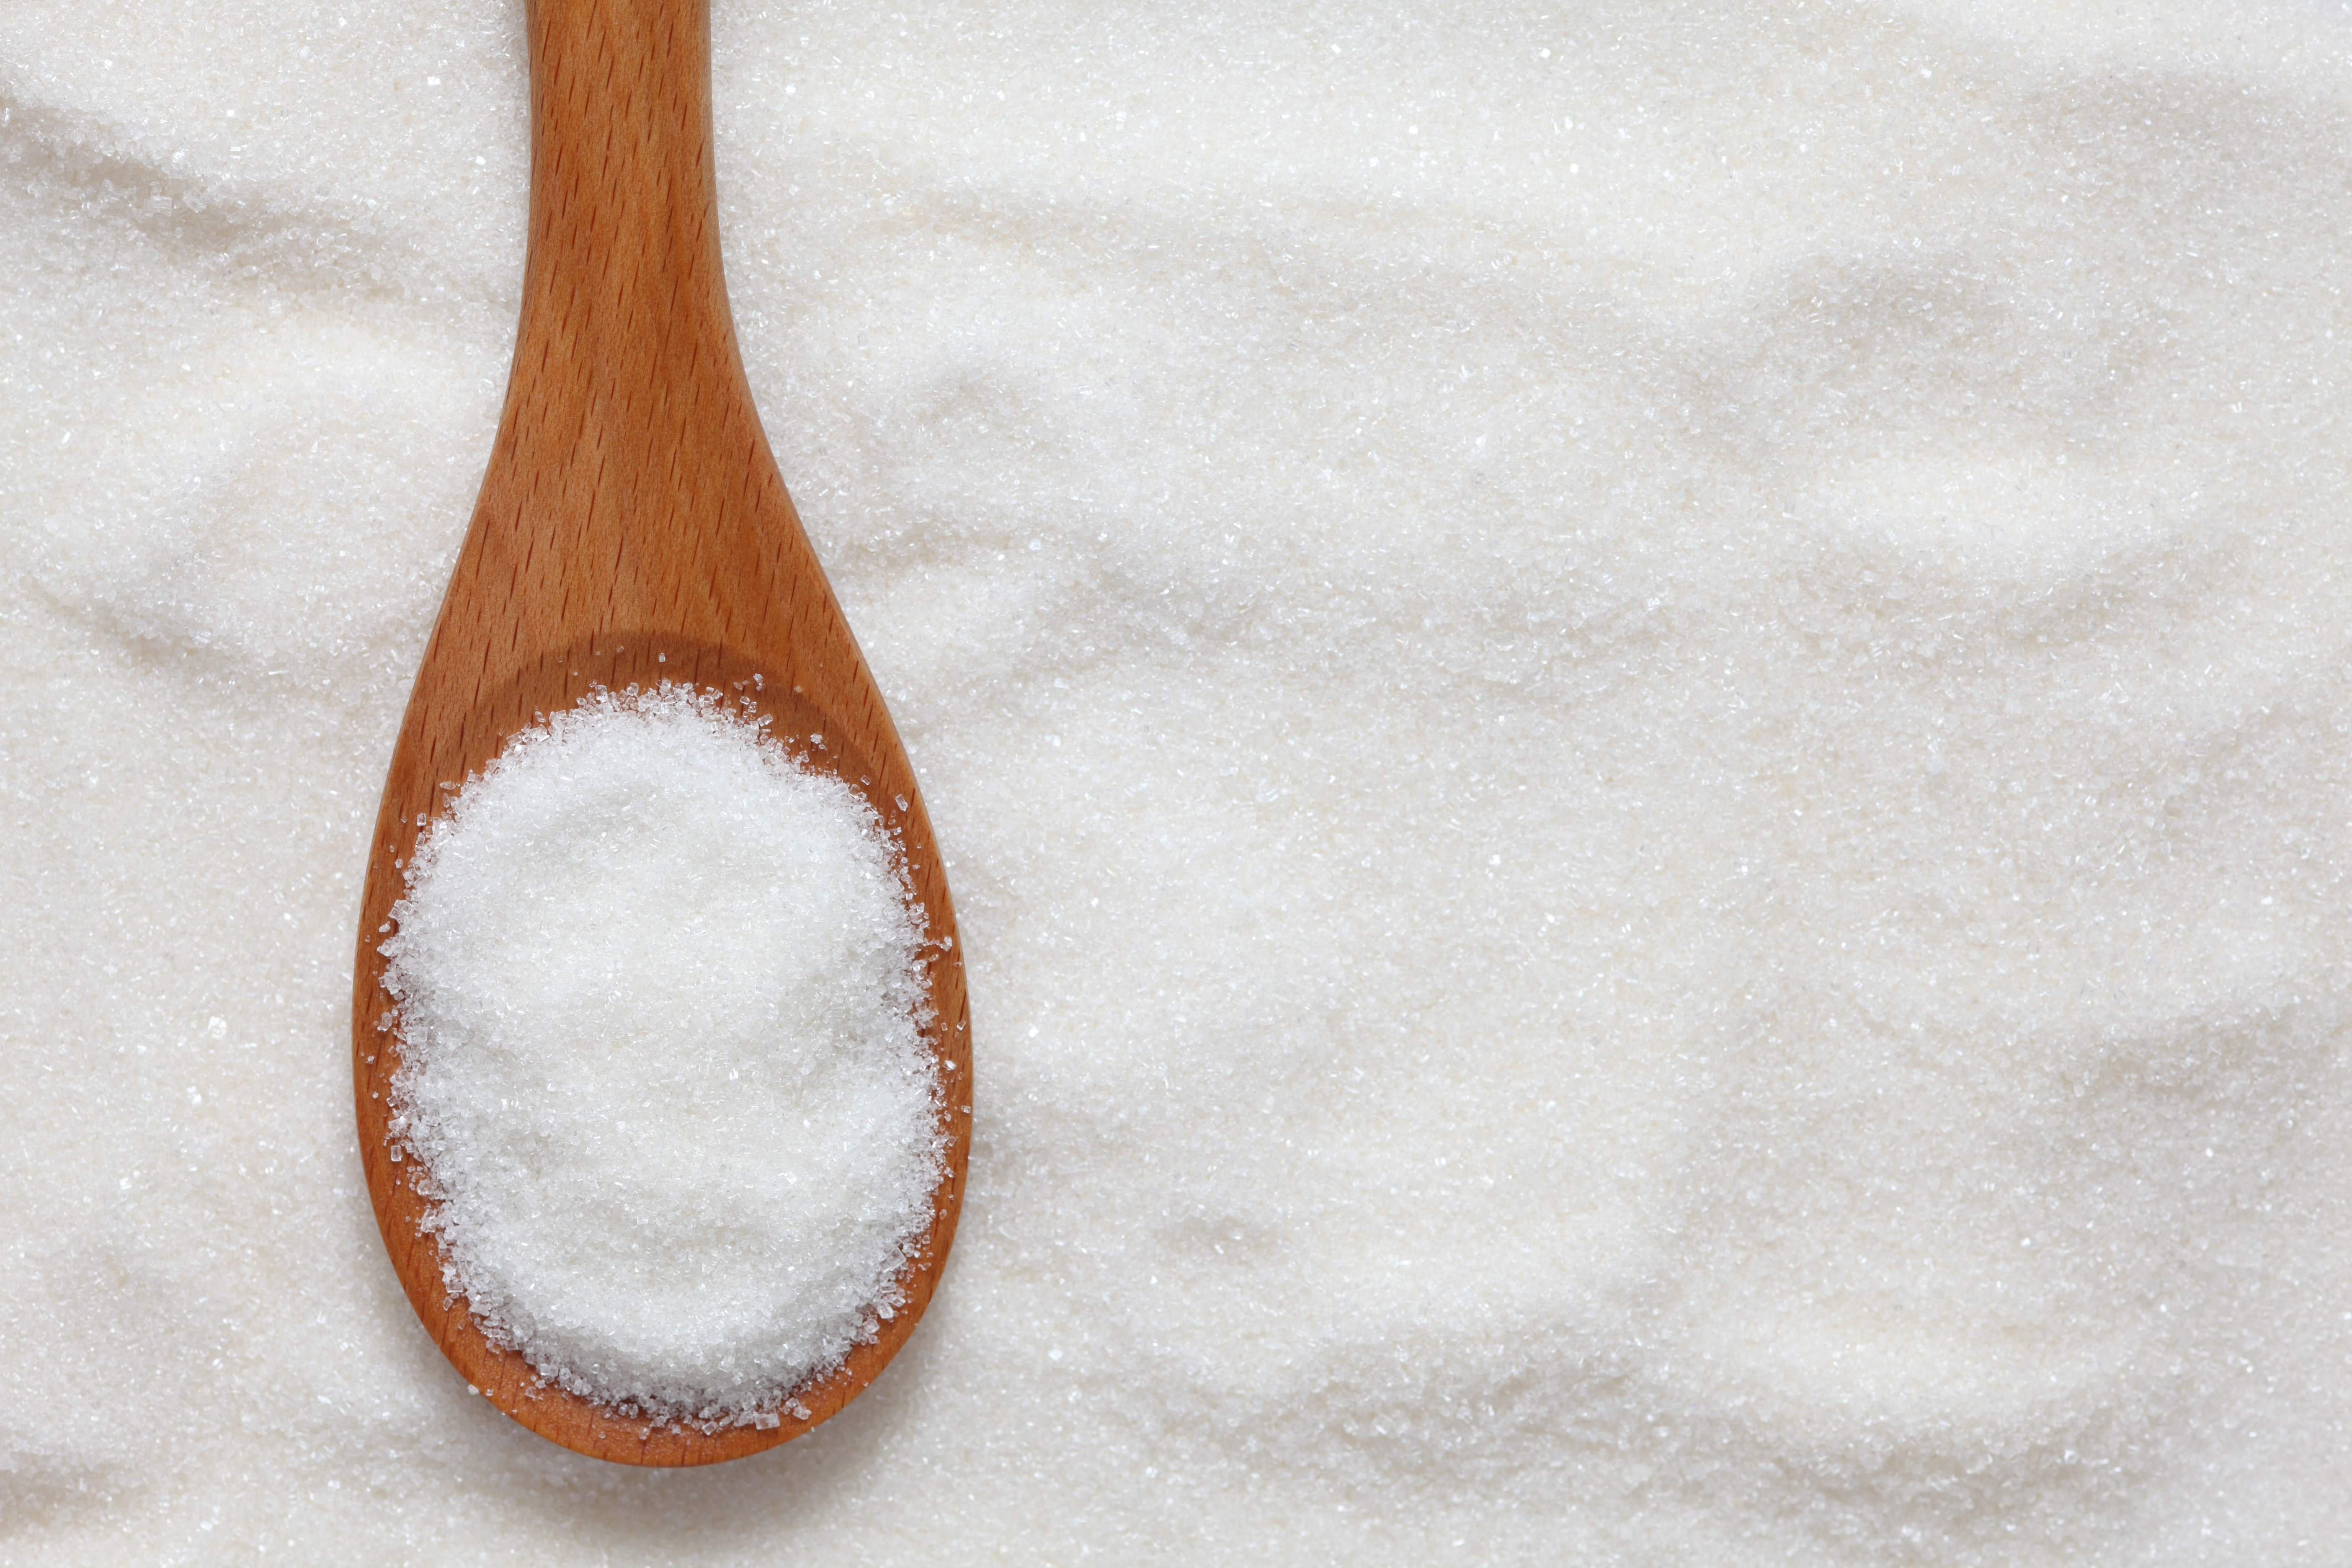 Can Too Much Sugar Make You Constipated?